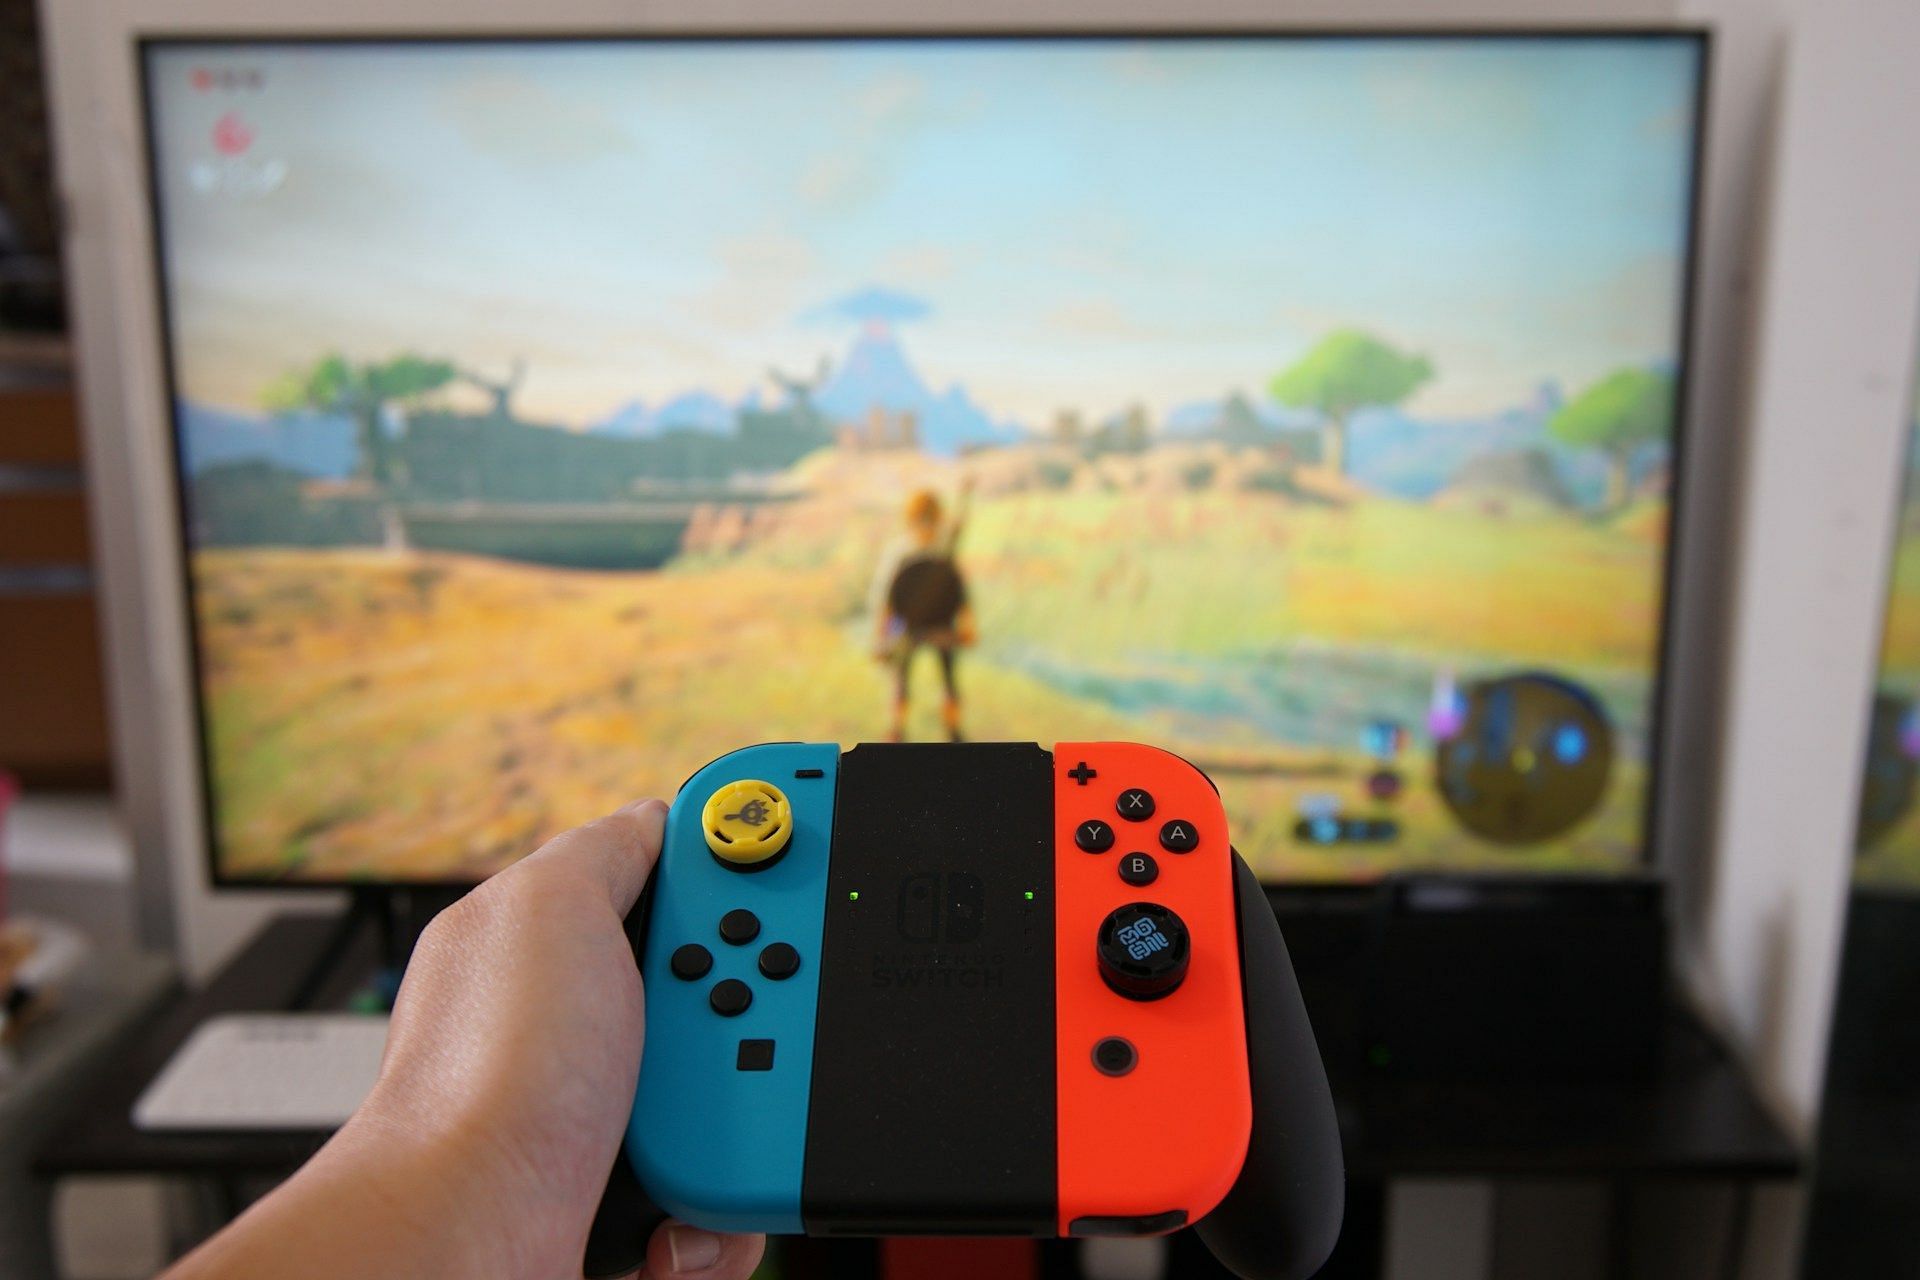 Nintendo being used as a console (Image by Ke Vin on Unsplash)